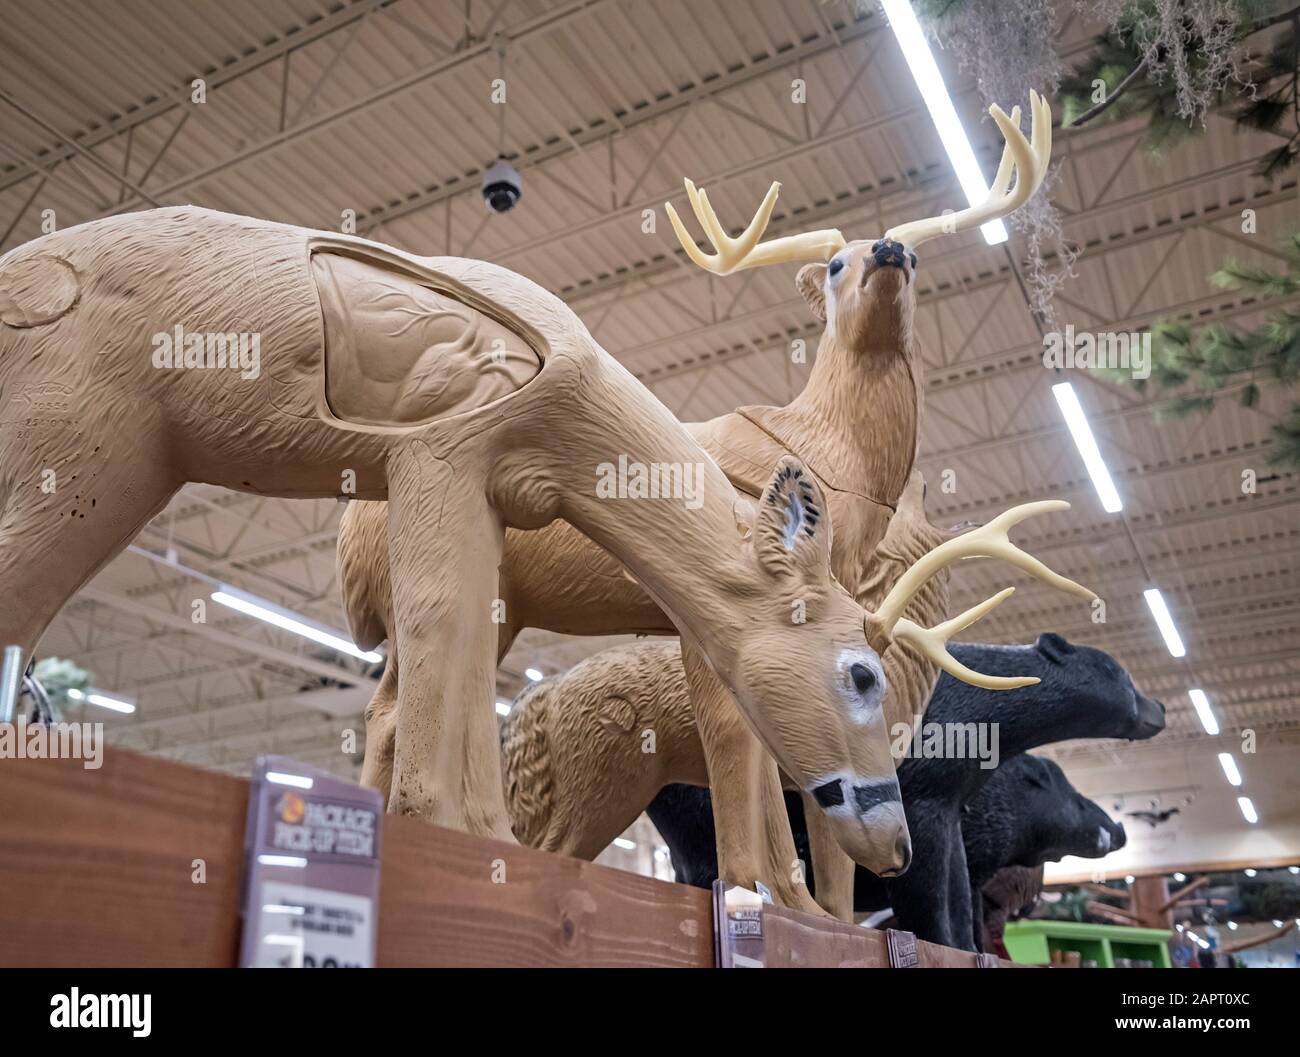 Life size 3-D archery targets and decoys for bowhunting season at Bass Pro Shops outdoors store, Gainesville, Florida. Stock Photo